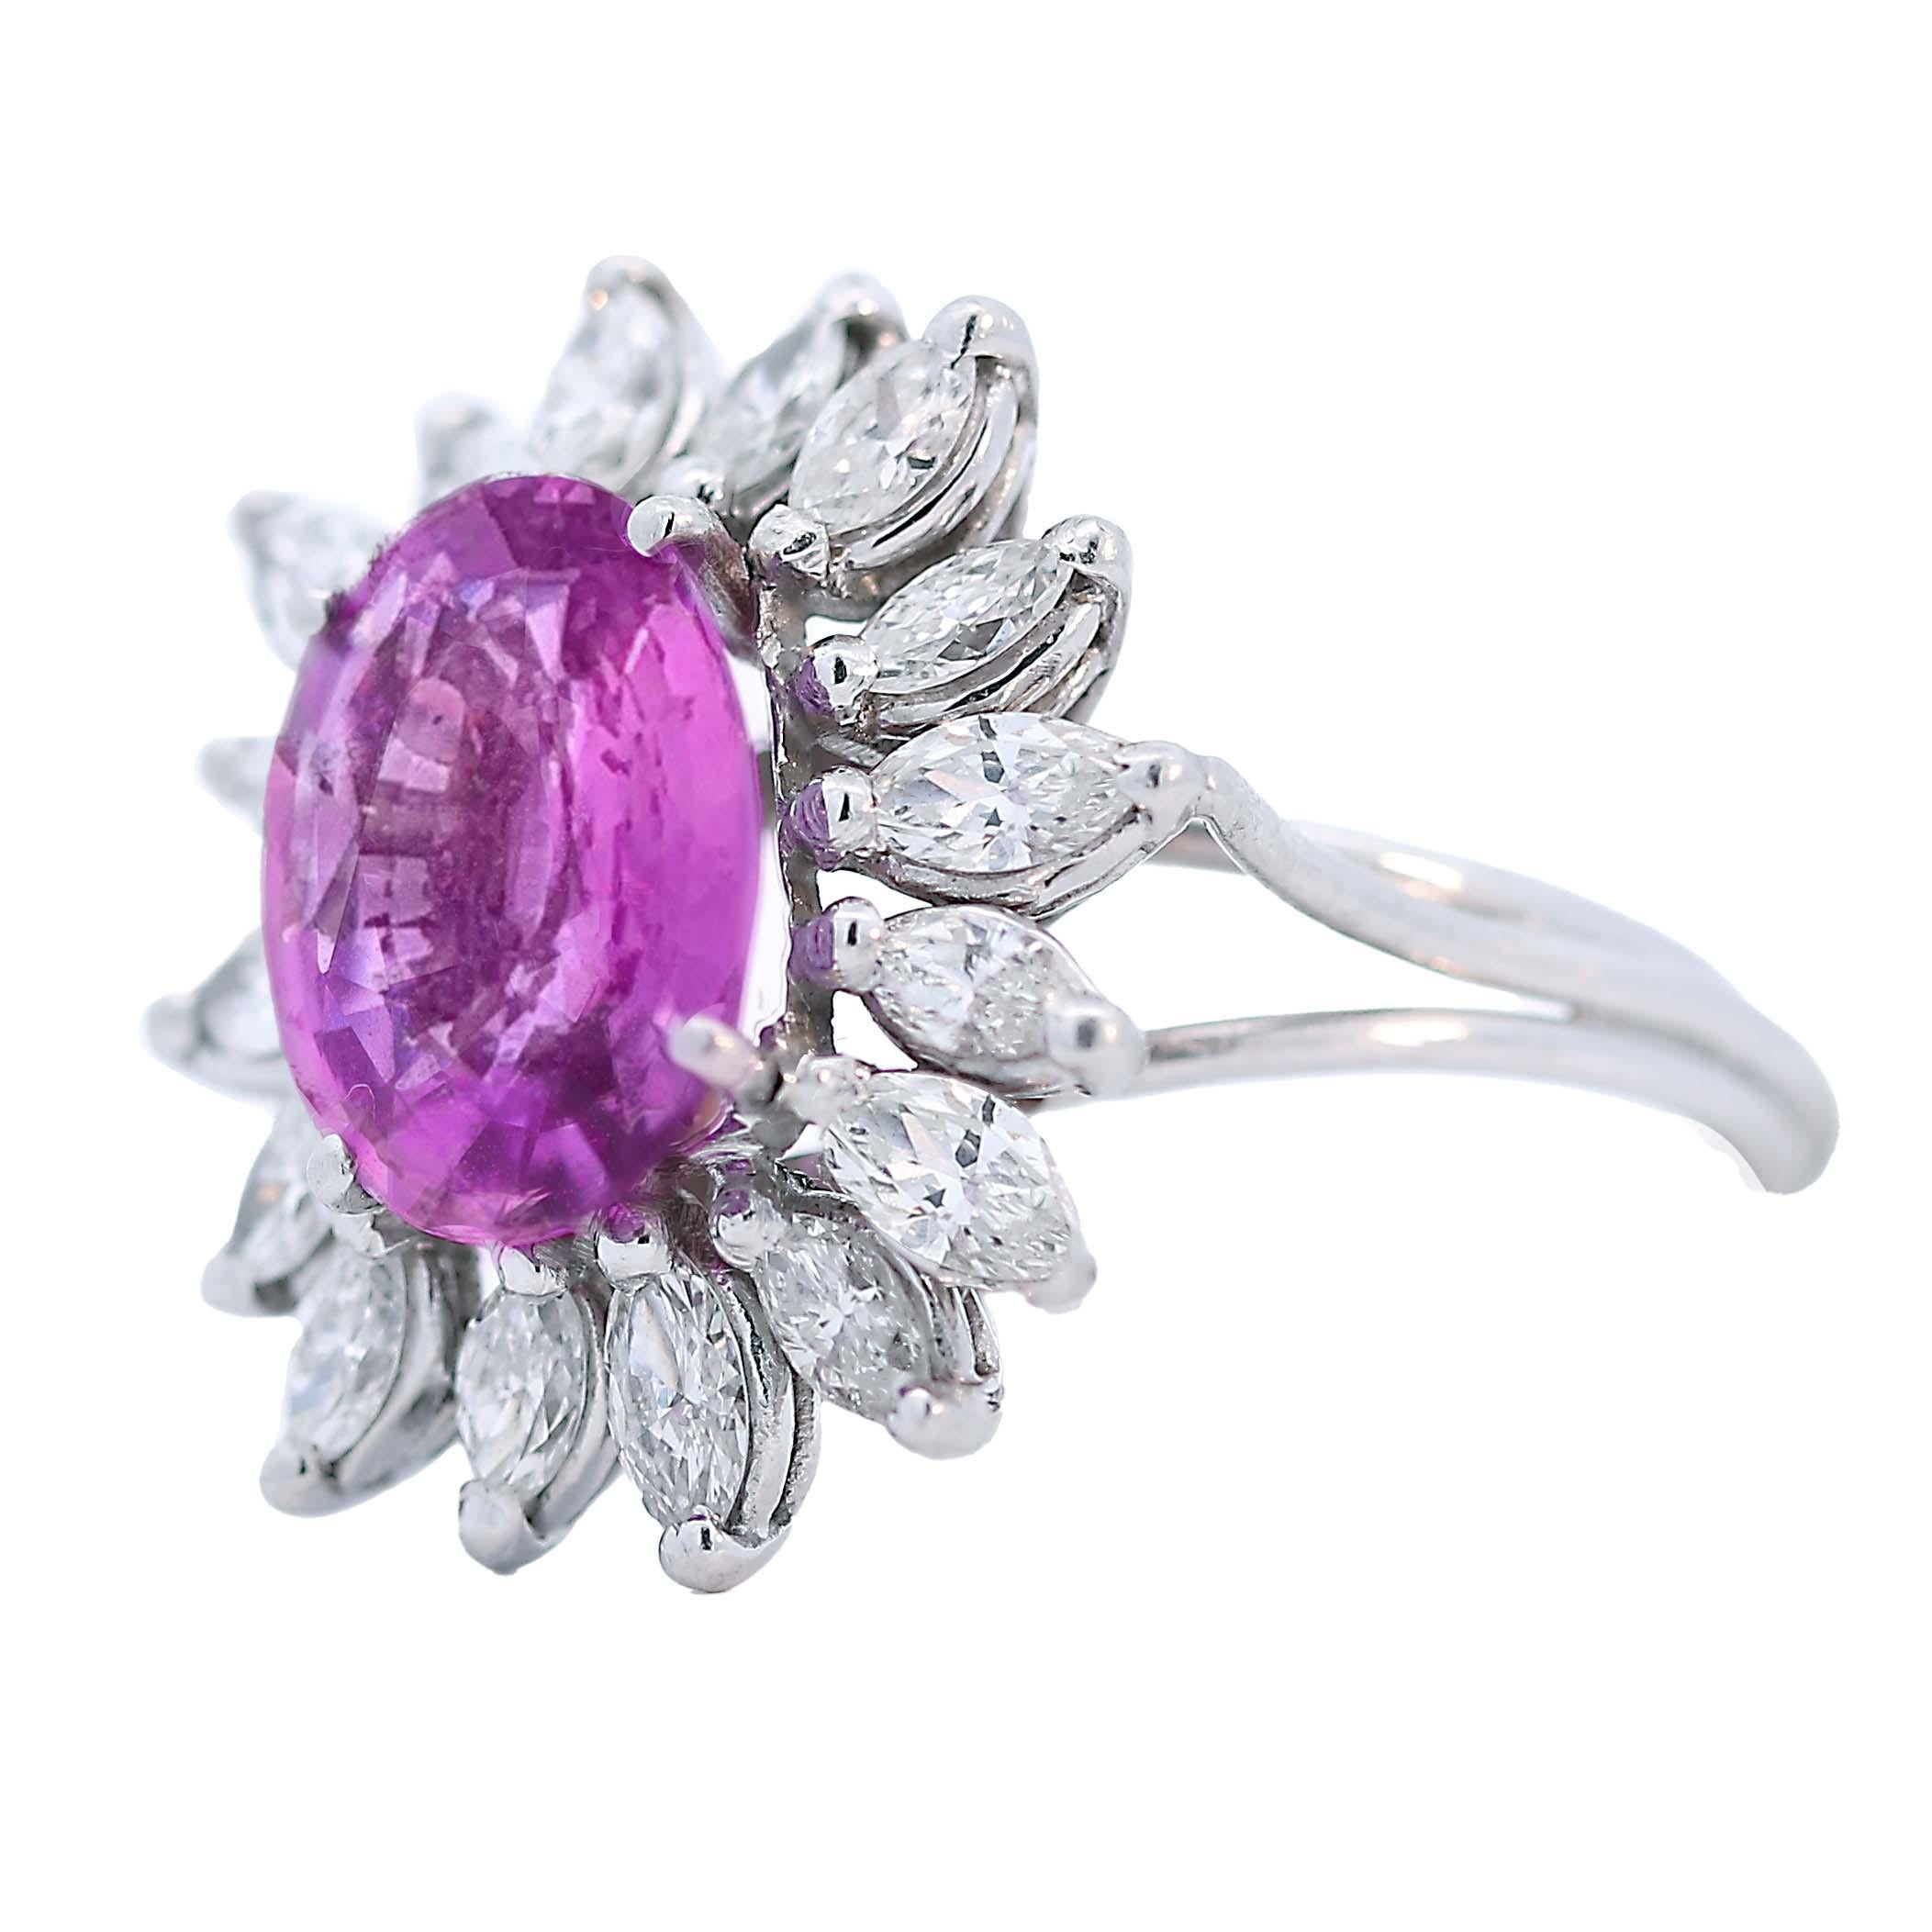 Oval Cut Certified Pink Sapphire Gemstone and Diamond Cocktail Ring For Sale